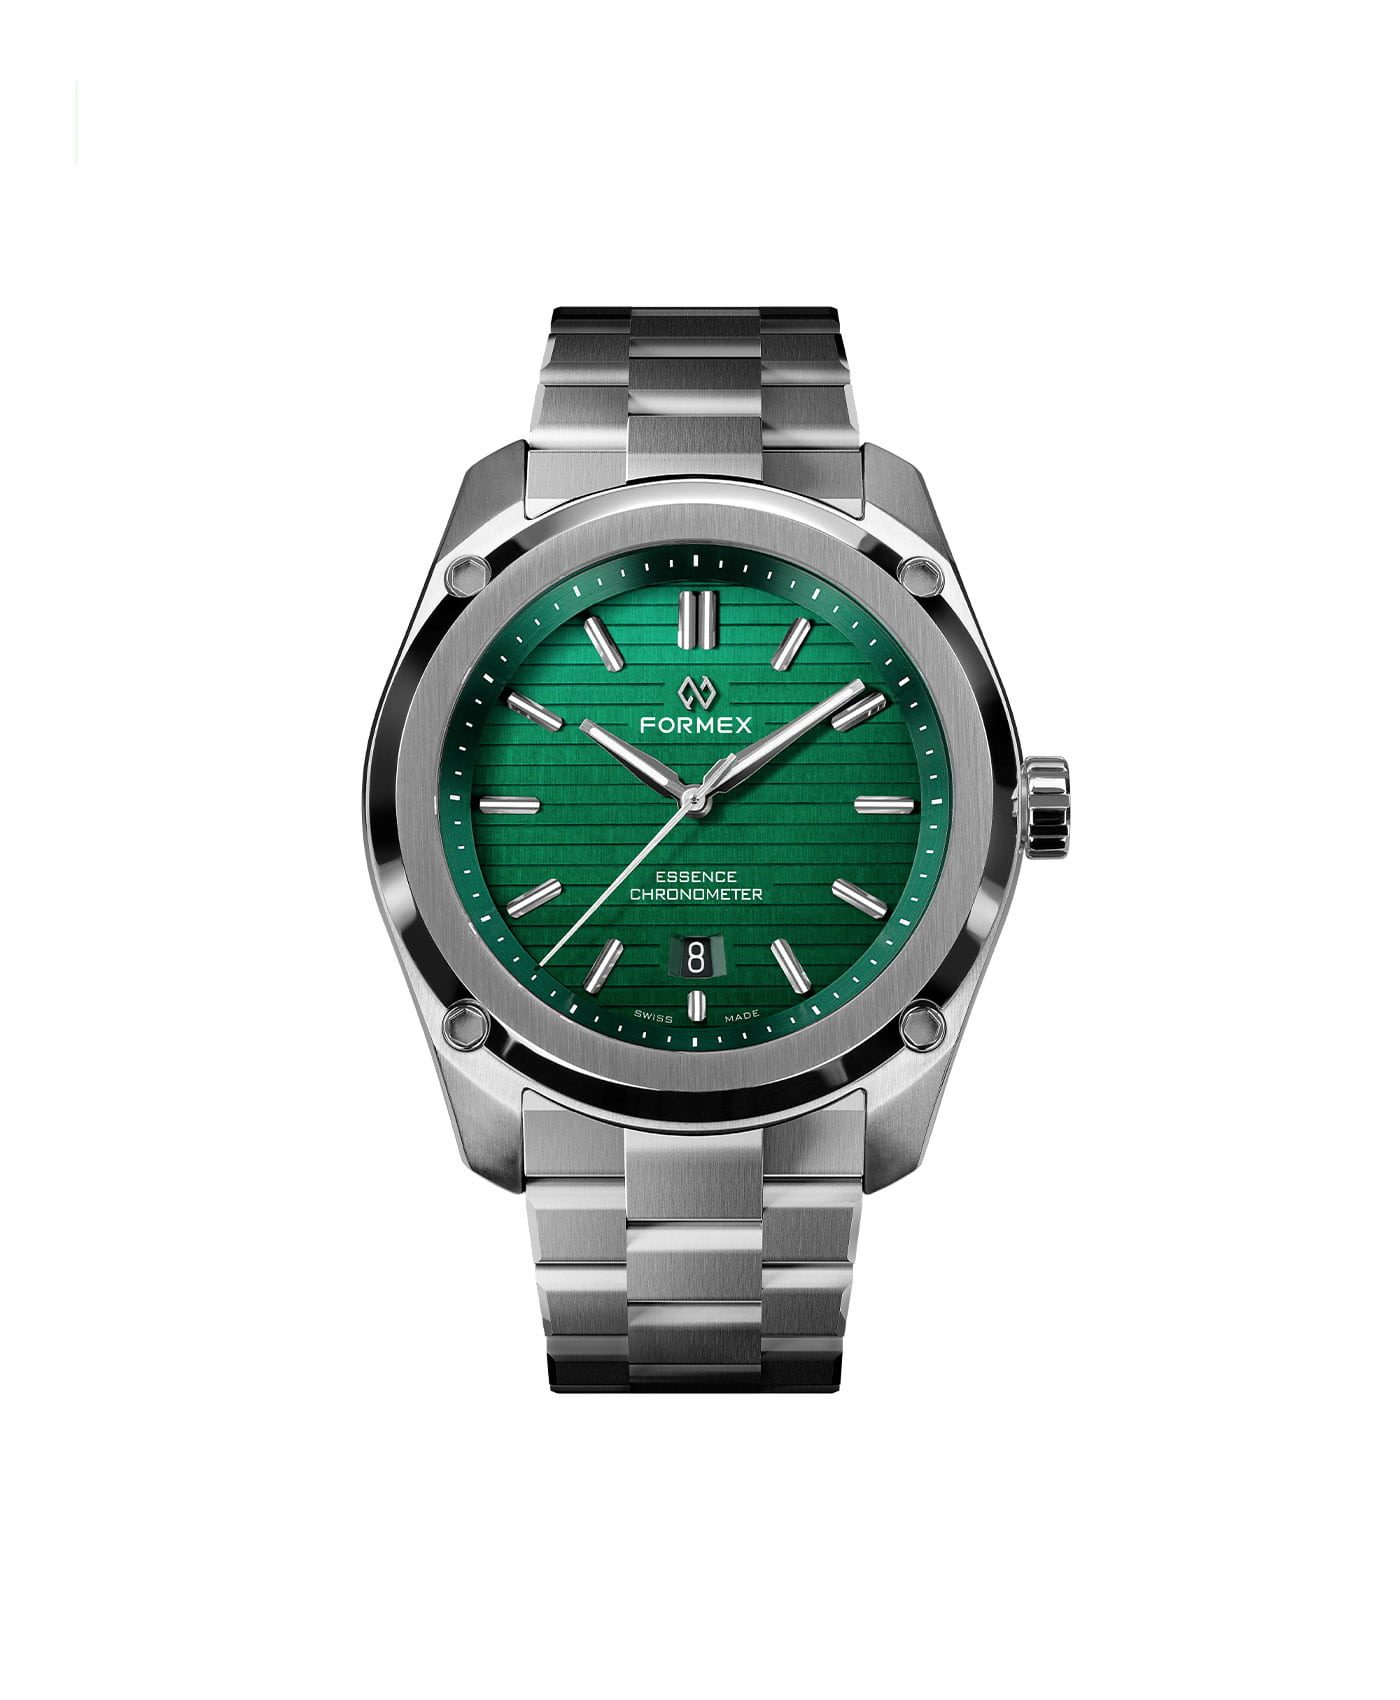 Formex - Essence ThirtyNine - Automatic Chronometer Green dial